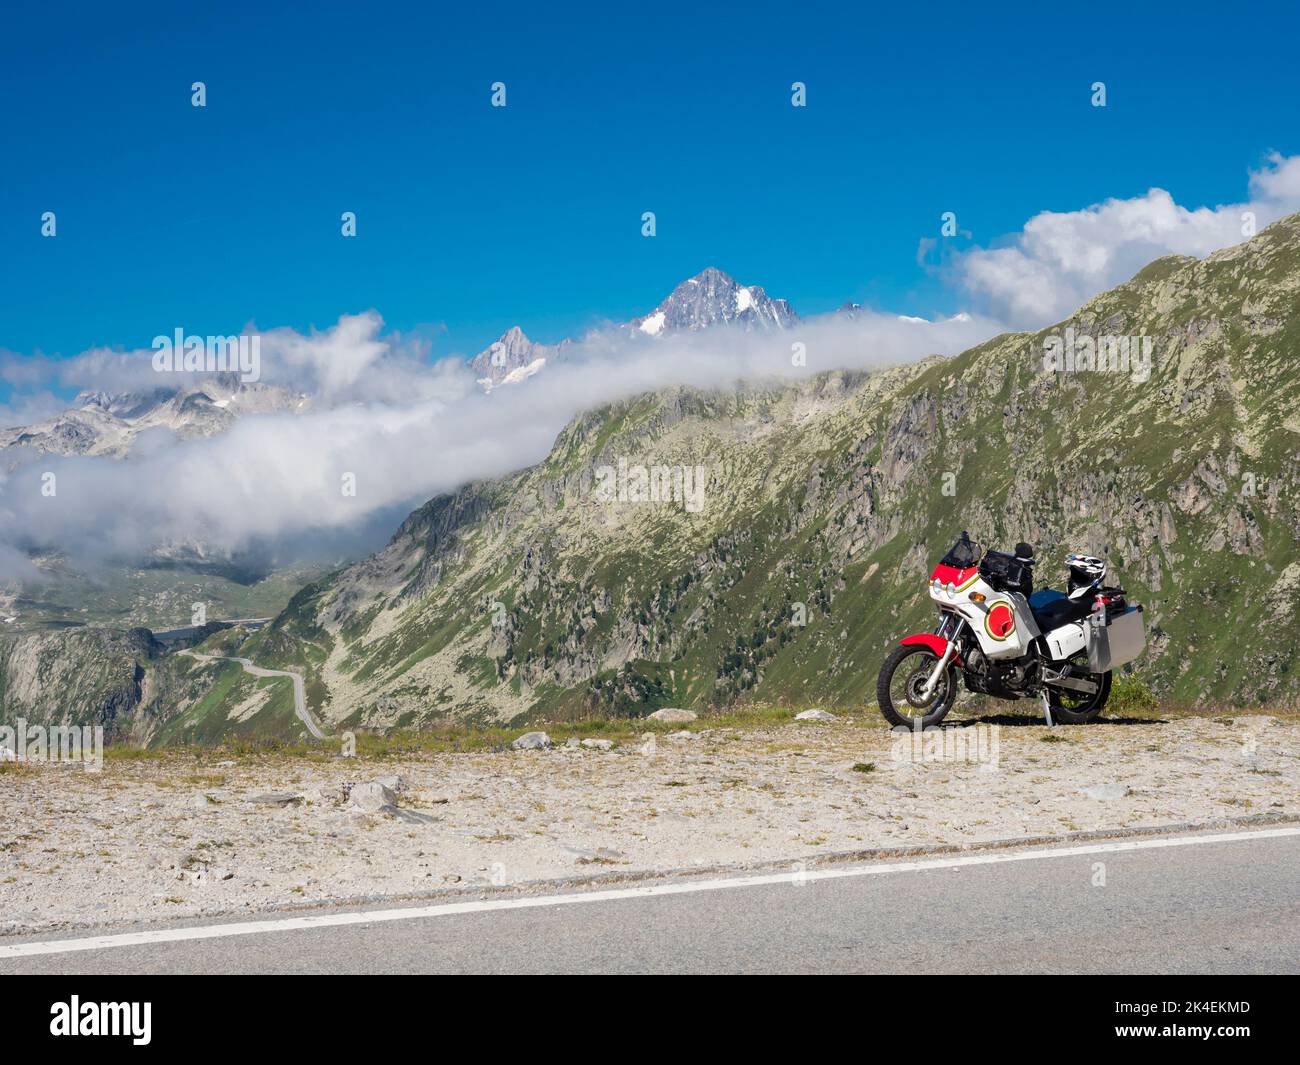 An adventure motorcycle with is parked at a mountain pass in the Swiss alps. Stock Photo